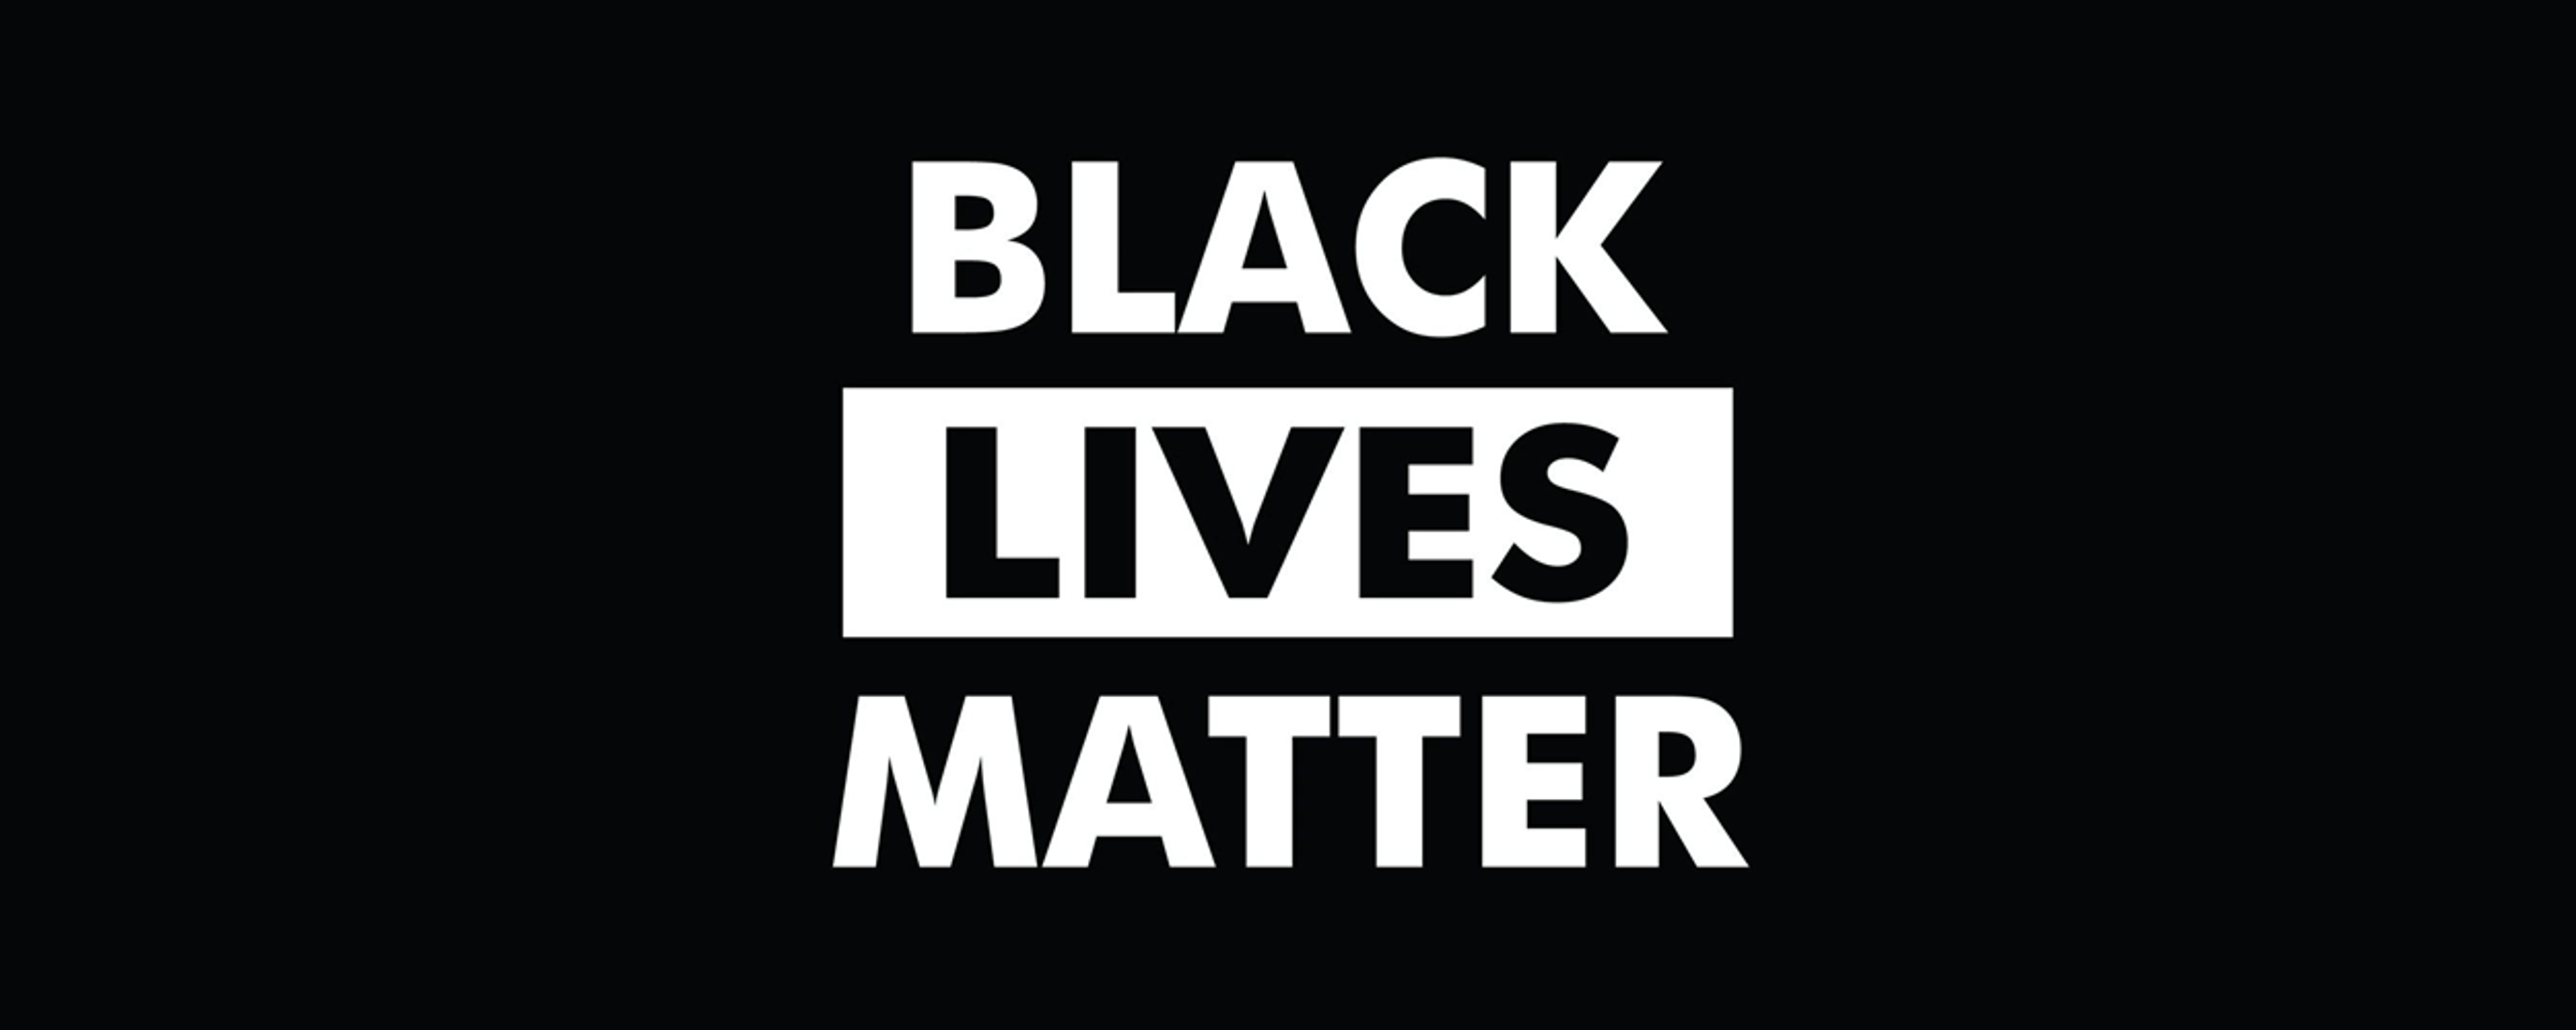 The words Black Lives Matter in all caps